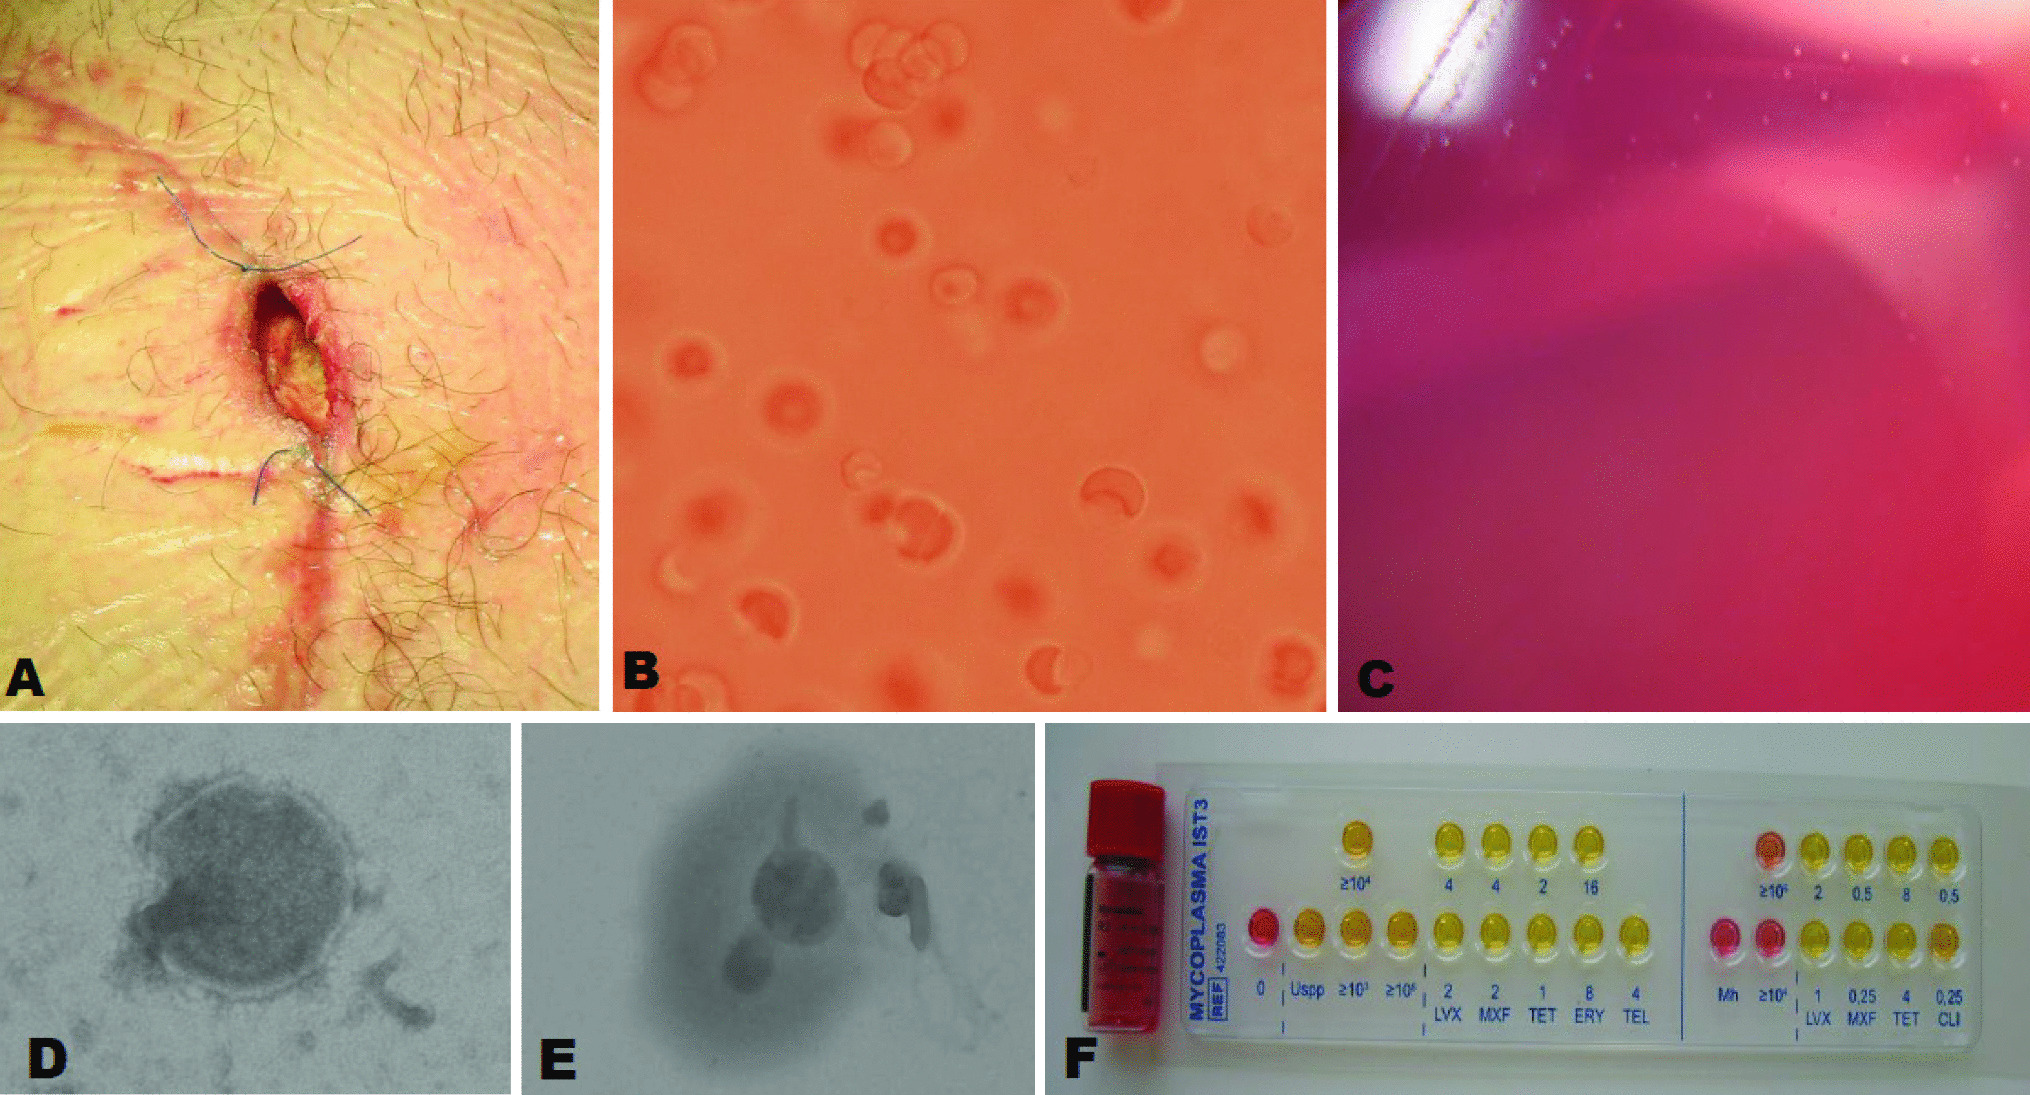 A rare case of postoperative Metamycoplasma hominis surgical site infection in a patient after bilateral lung transplantation